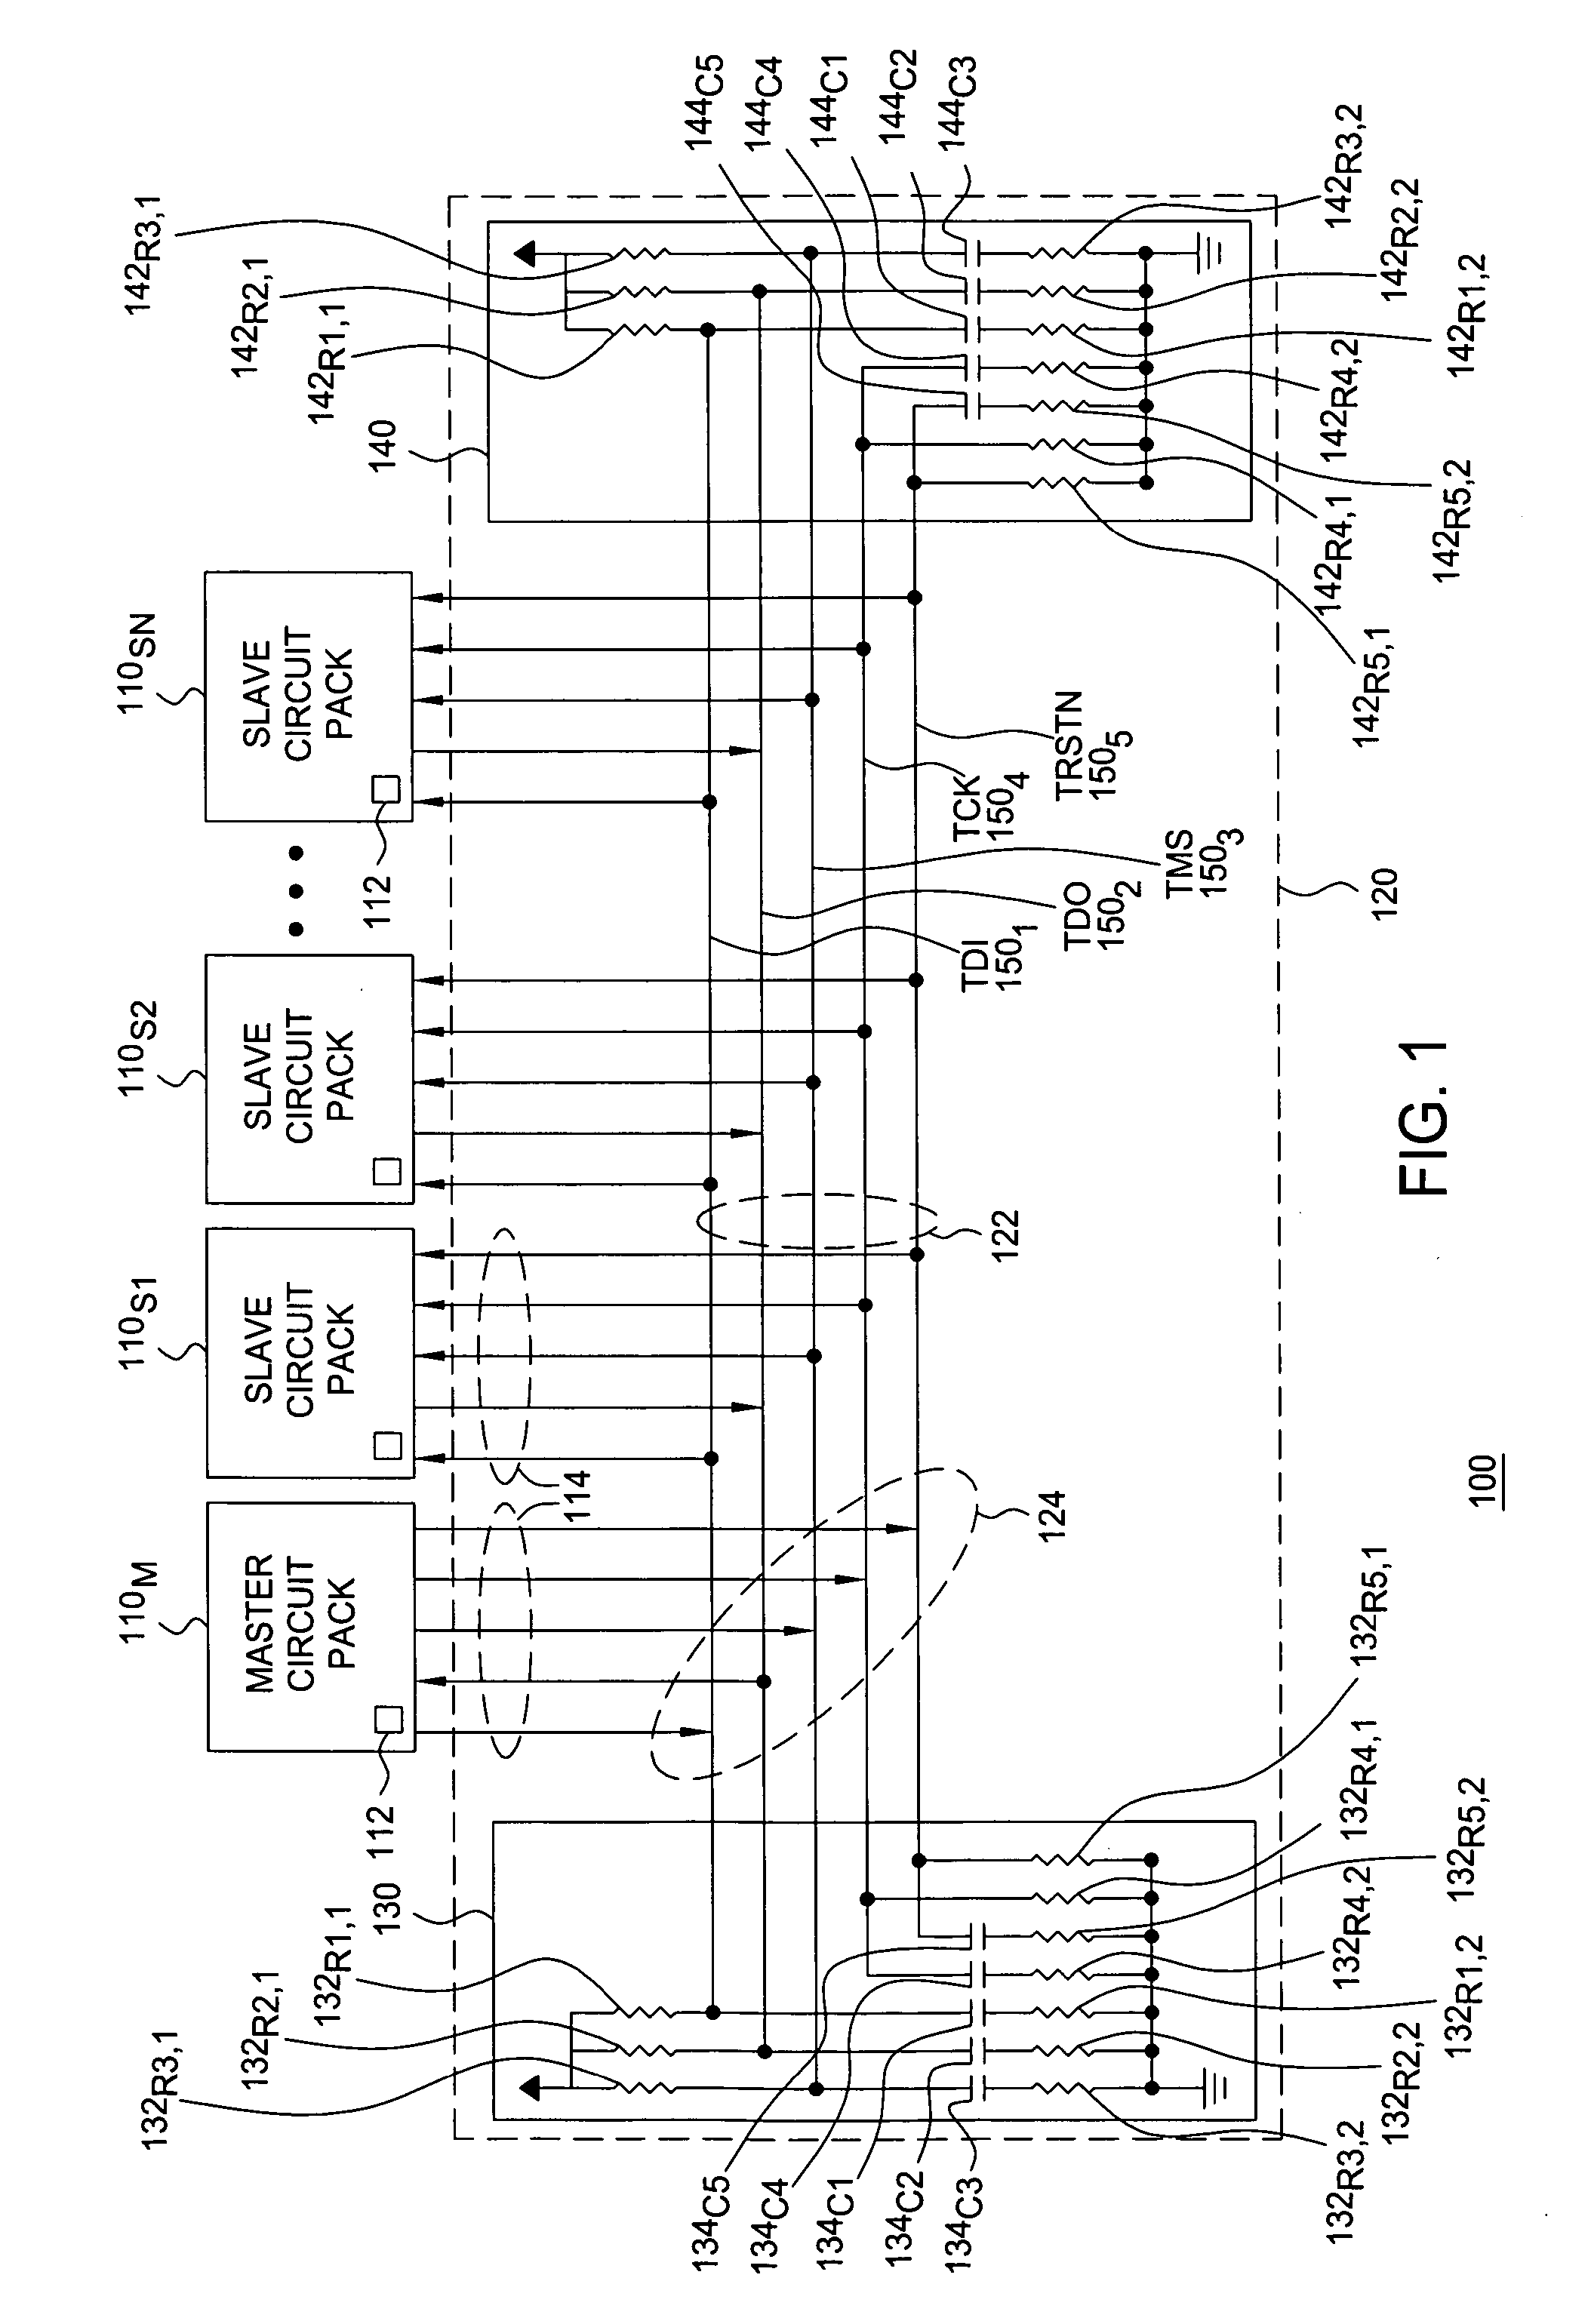 Method and apparatus for enabling multipoint bus access